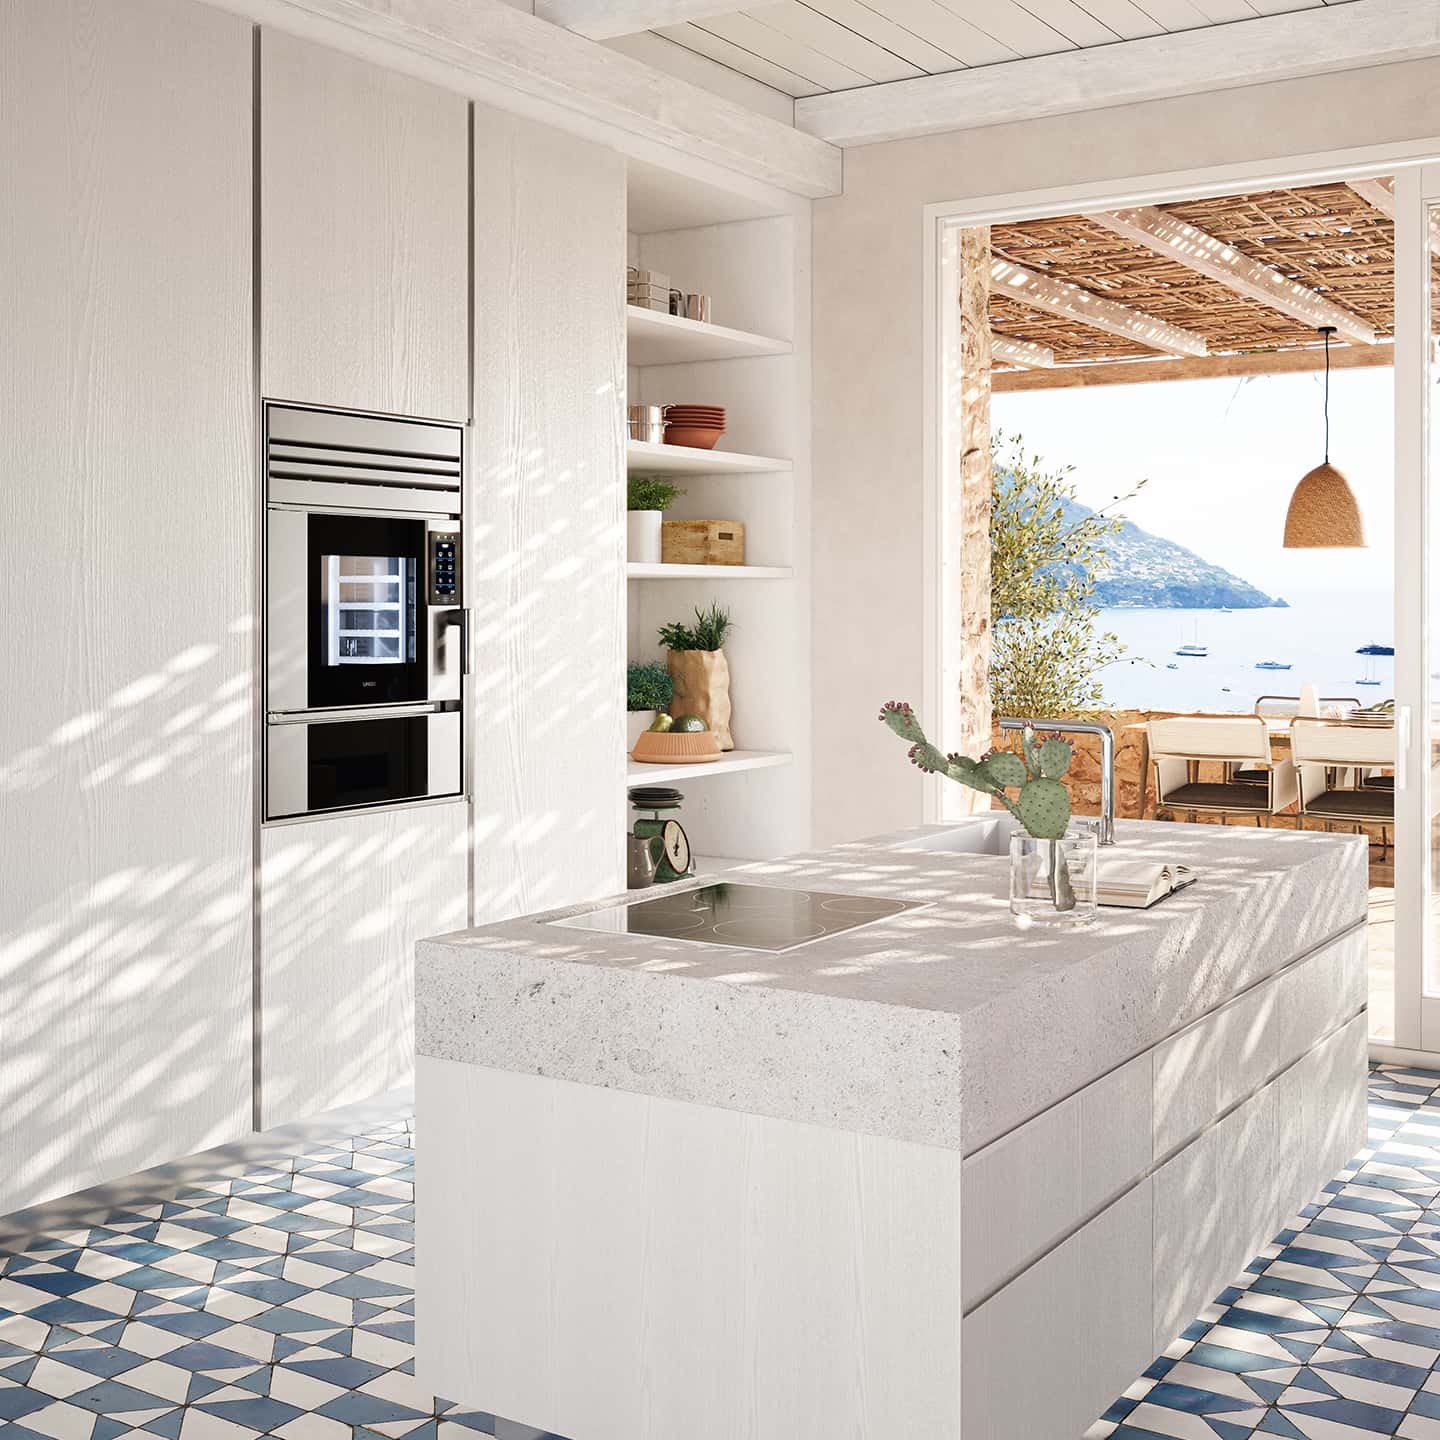 Luxury kitchen in Taormina adorned with Unox Casa's iconic 100% Made in Italy design